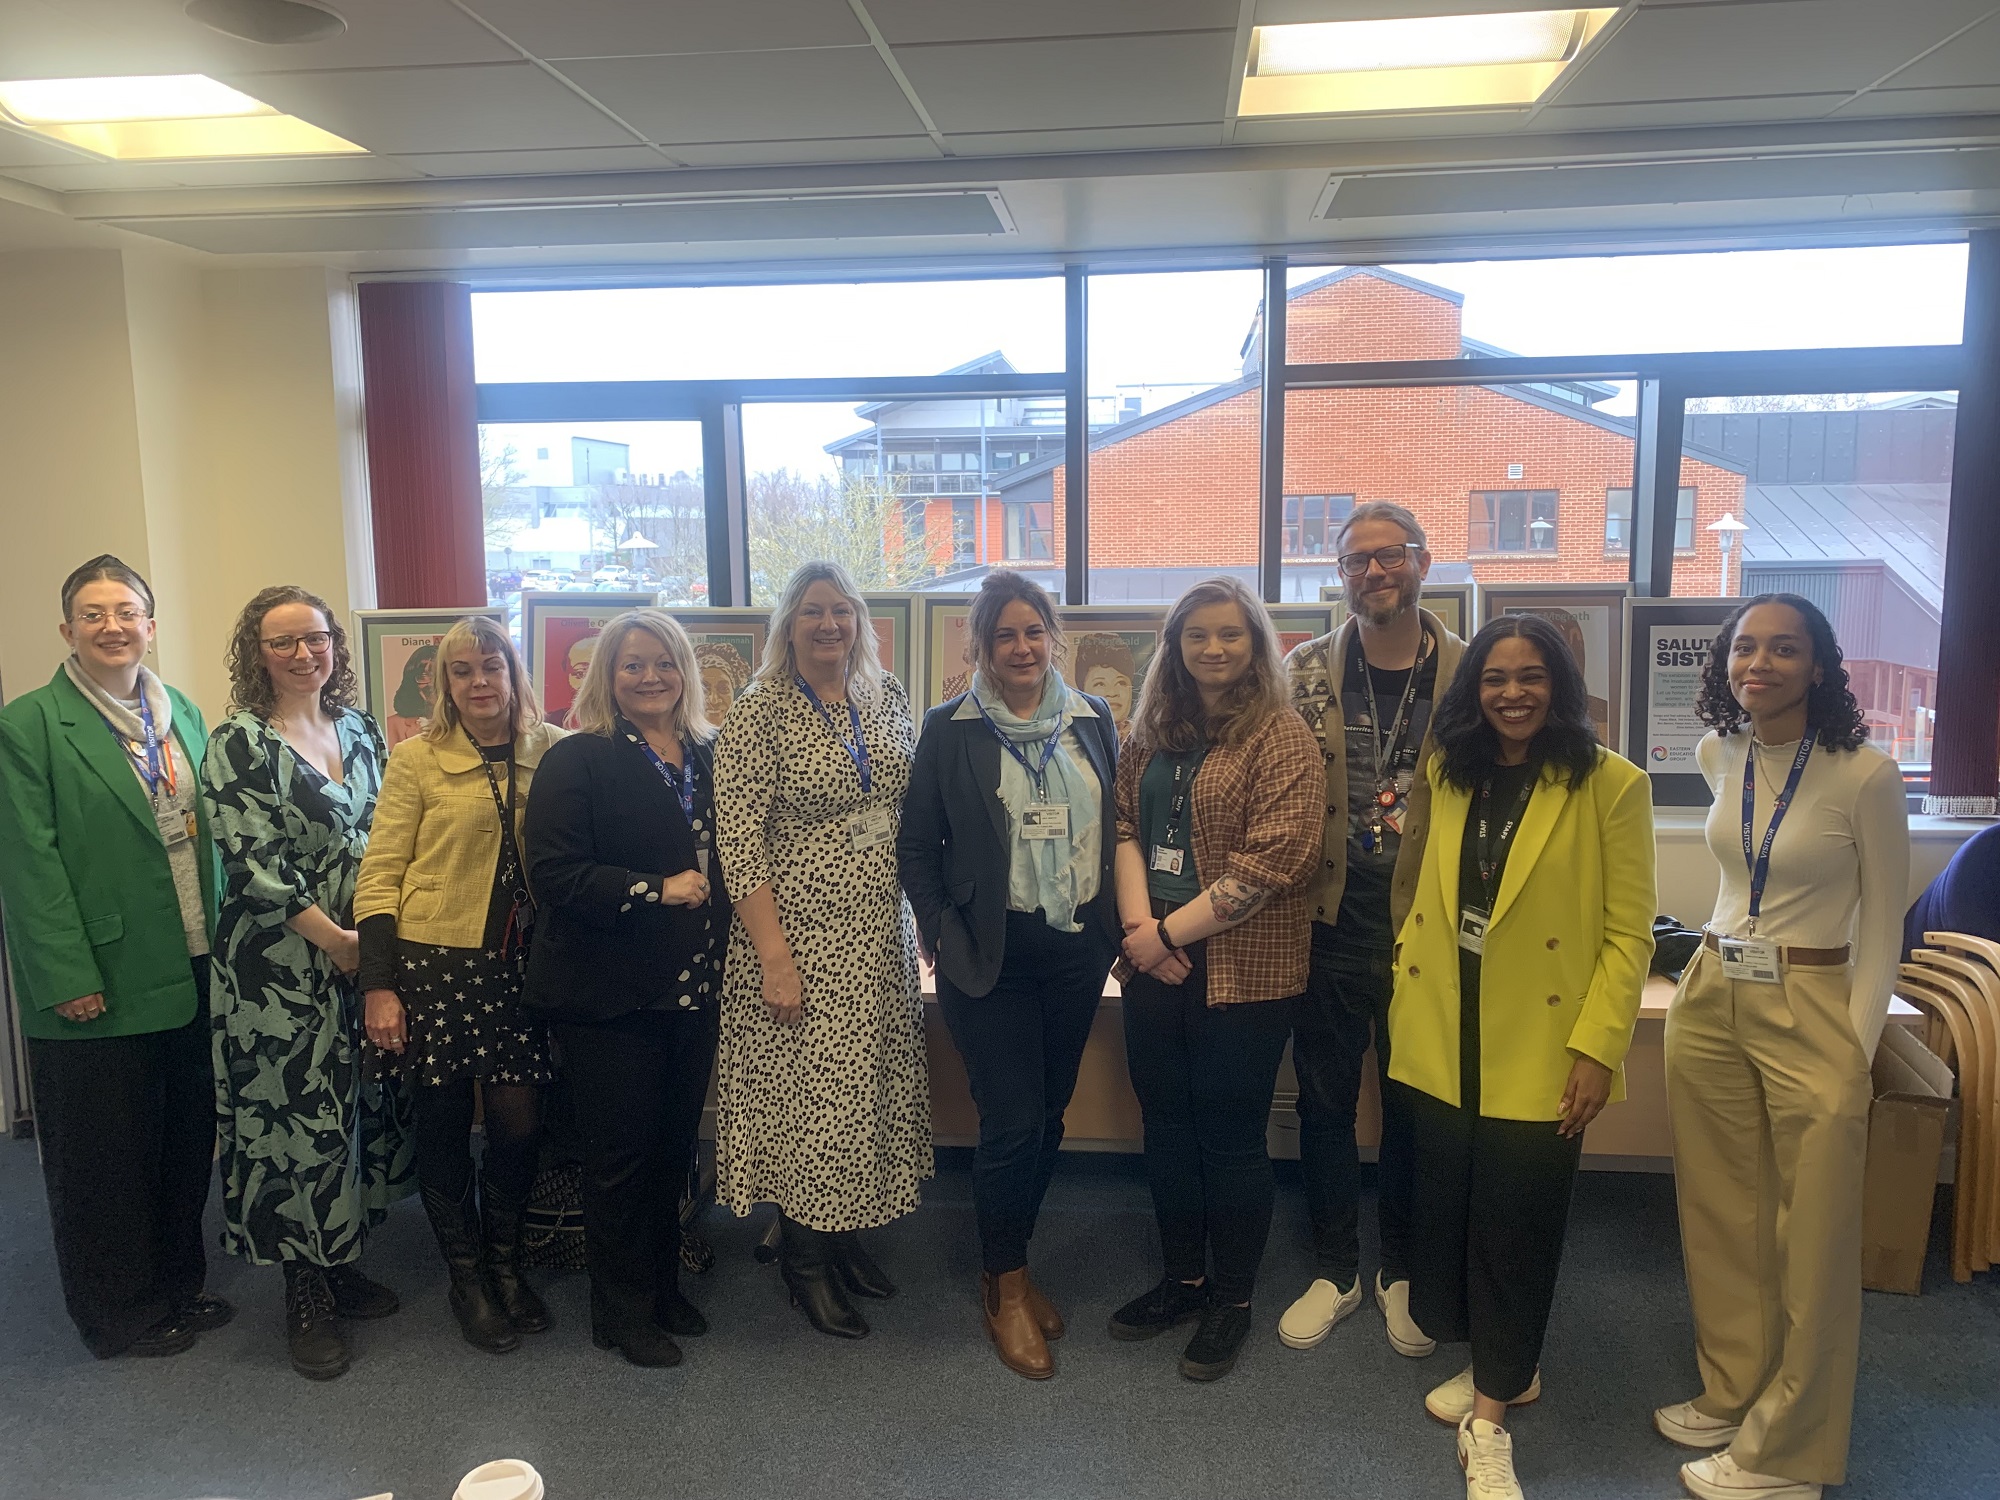 Charlie Nichols was one of the guest speakers at an IWD event held at the University Professional Development Centre in Bury St Edmunds